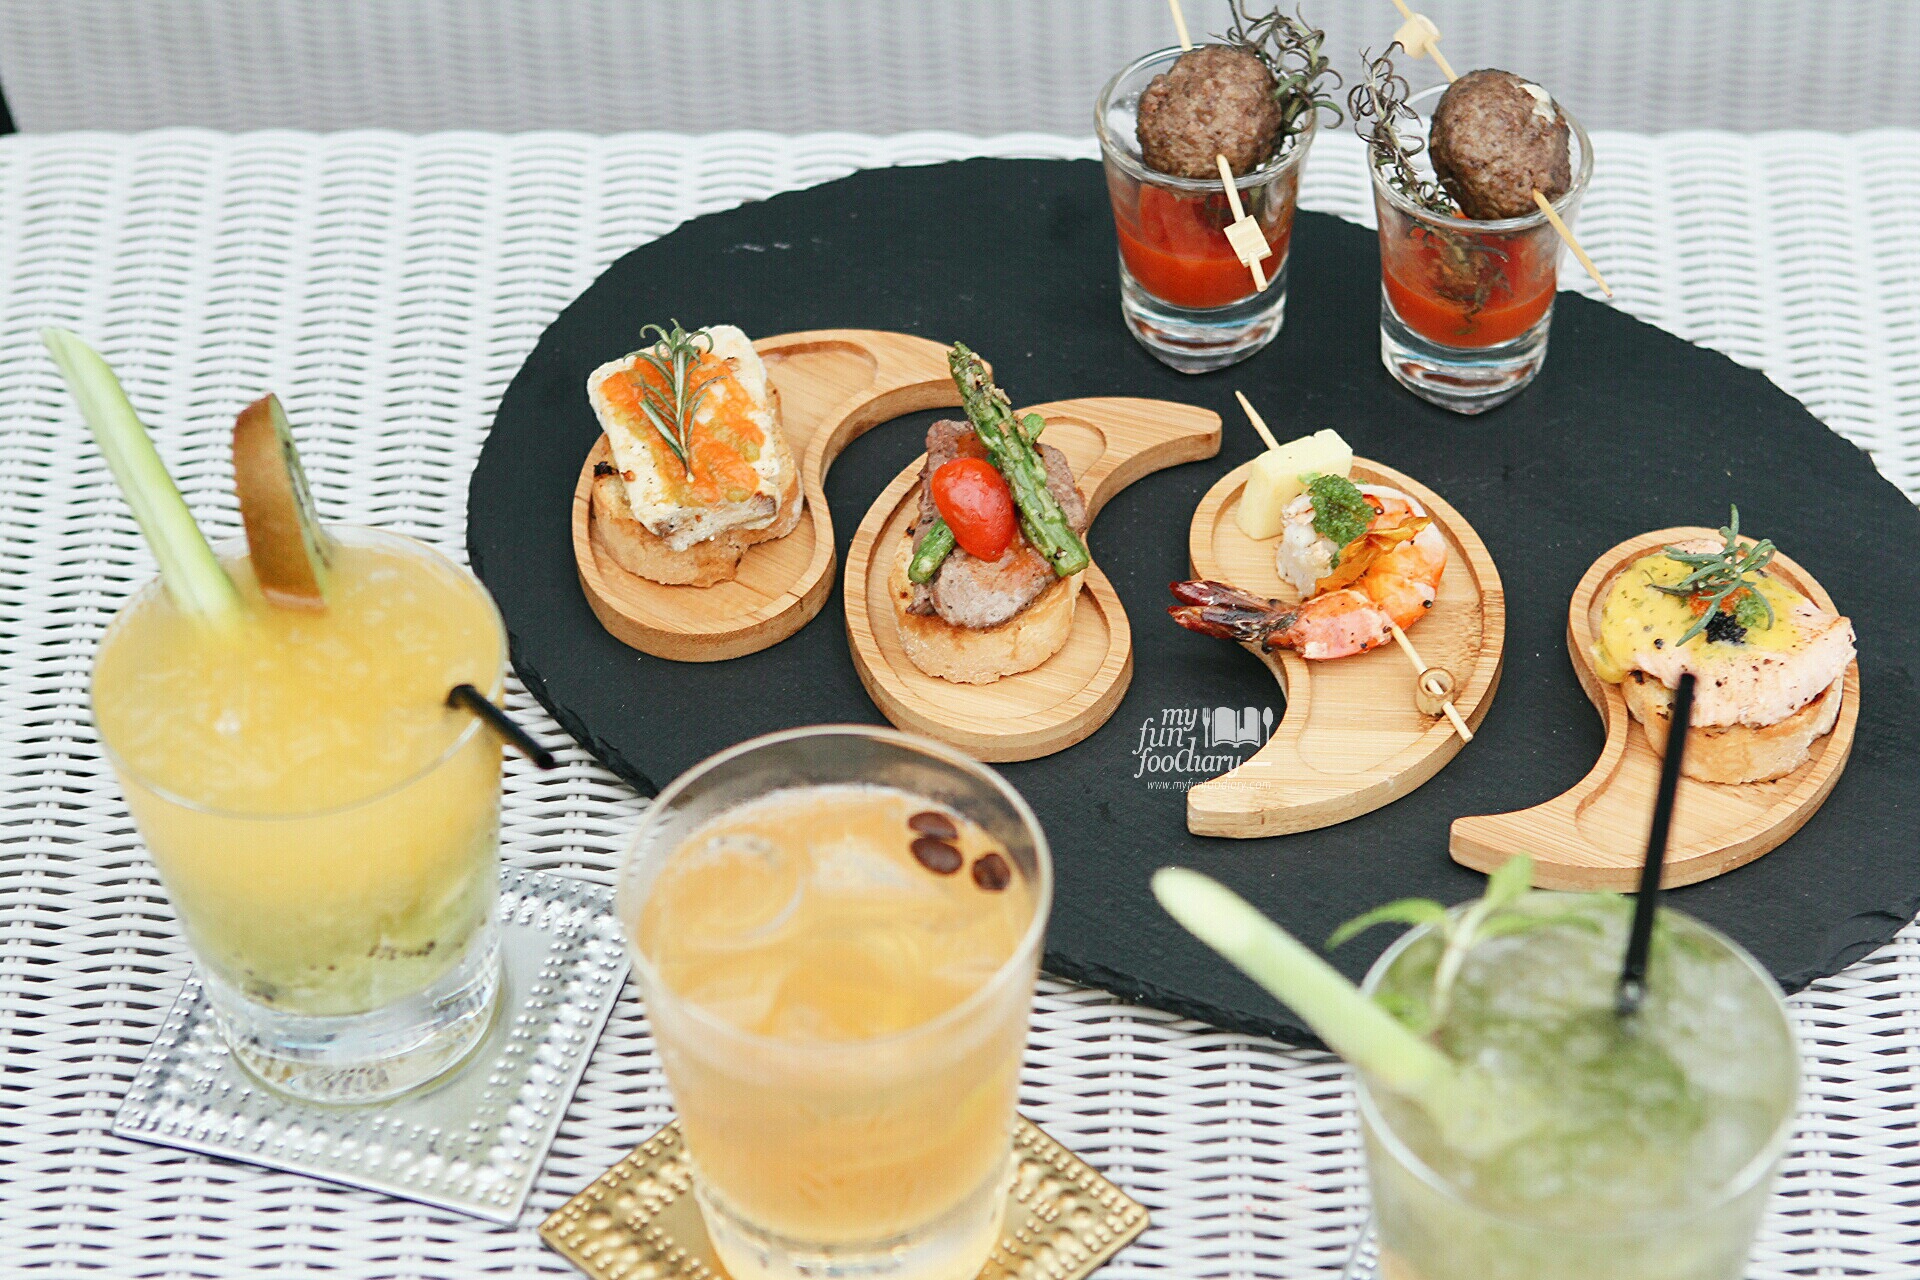 Mixed Tapas and Mocktail at 33 Degree Skybridge Lounge by Myfunfoodiary